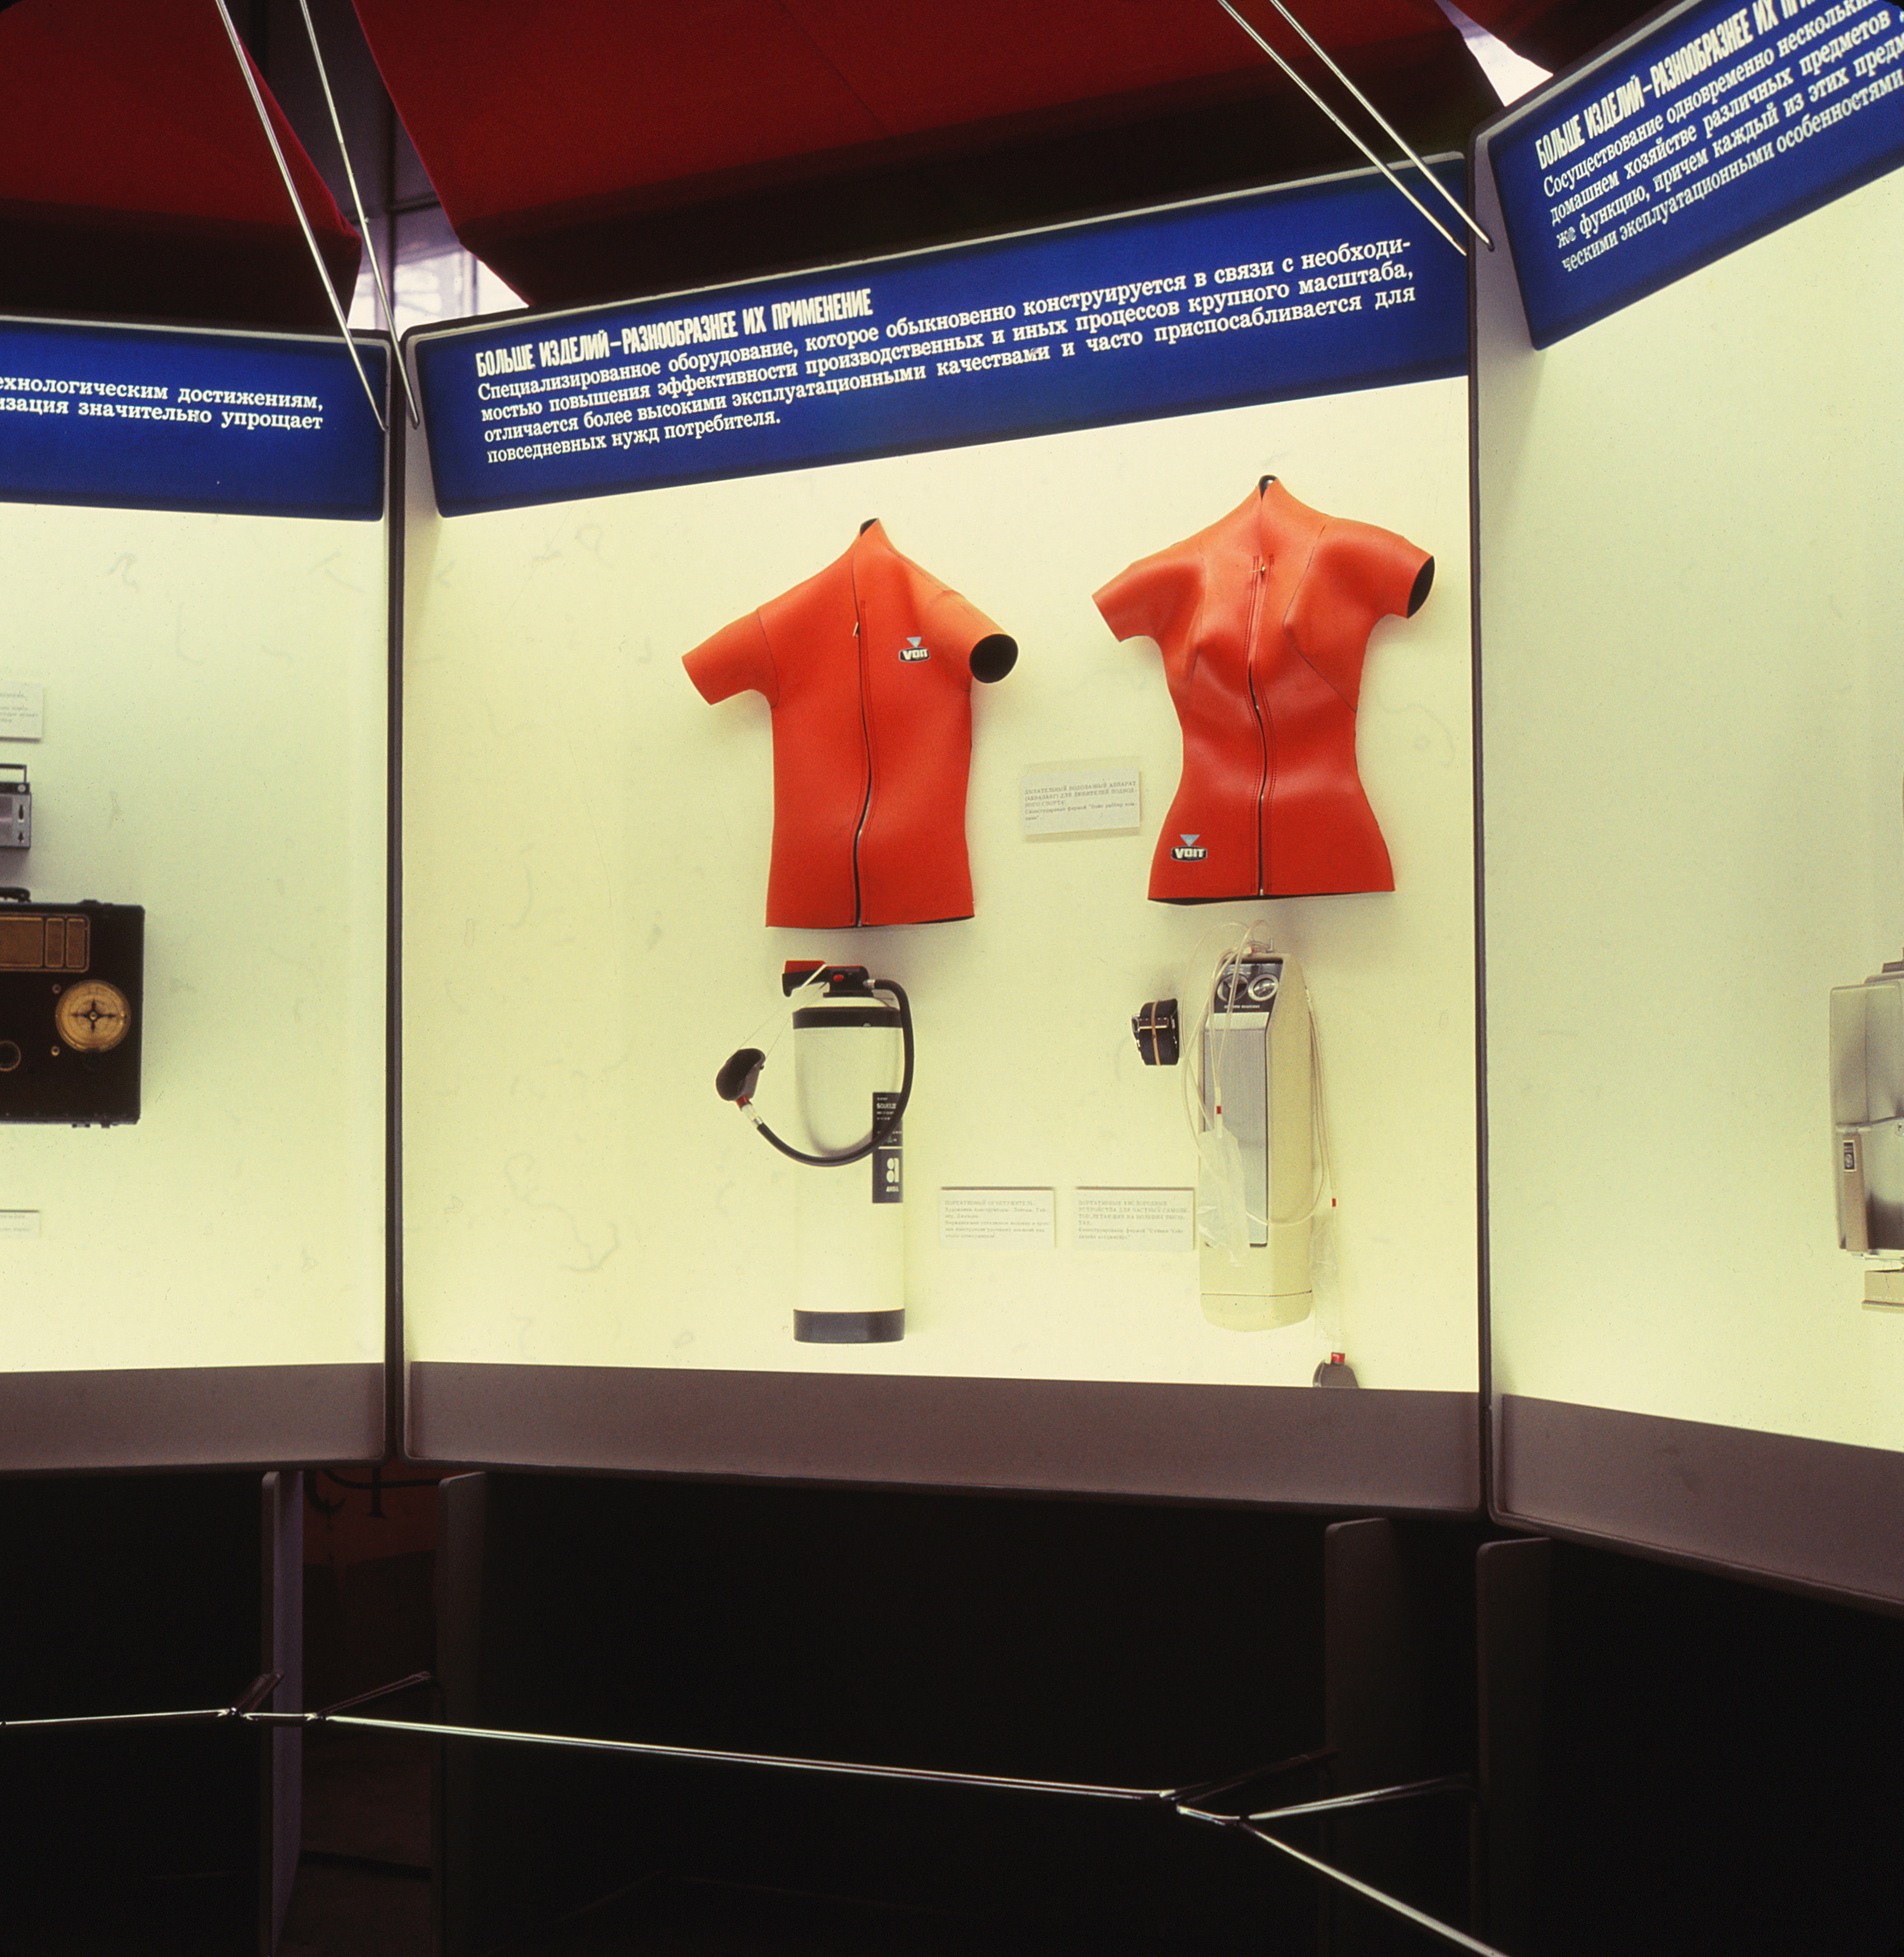 Display cases featuring scuba gear and wetsuits.